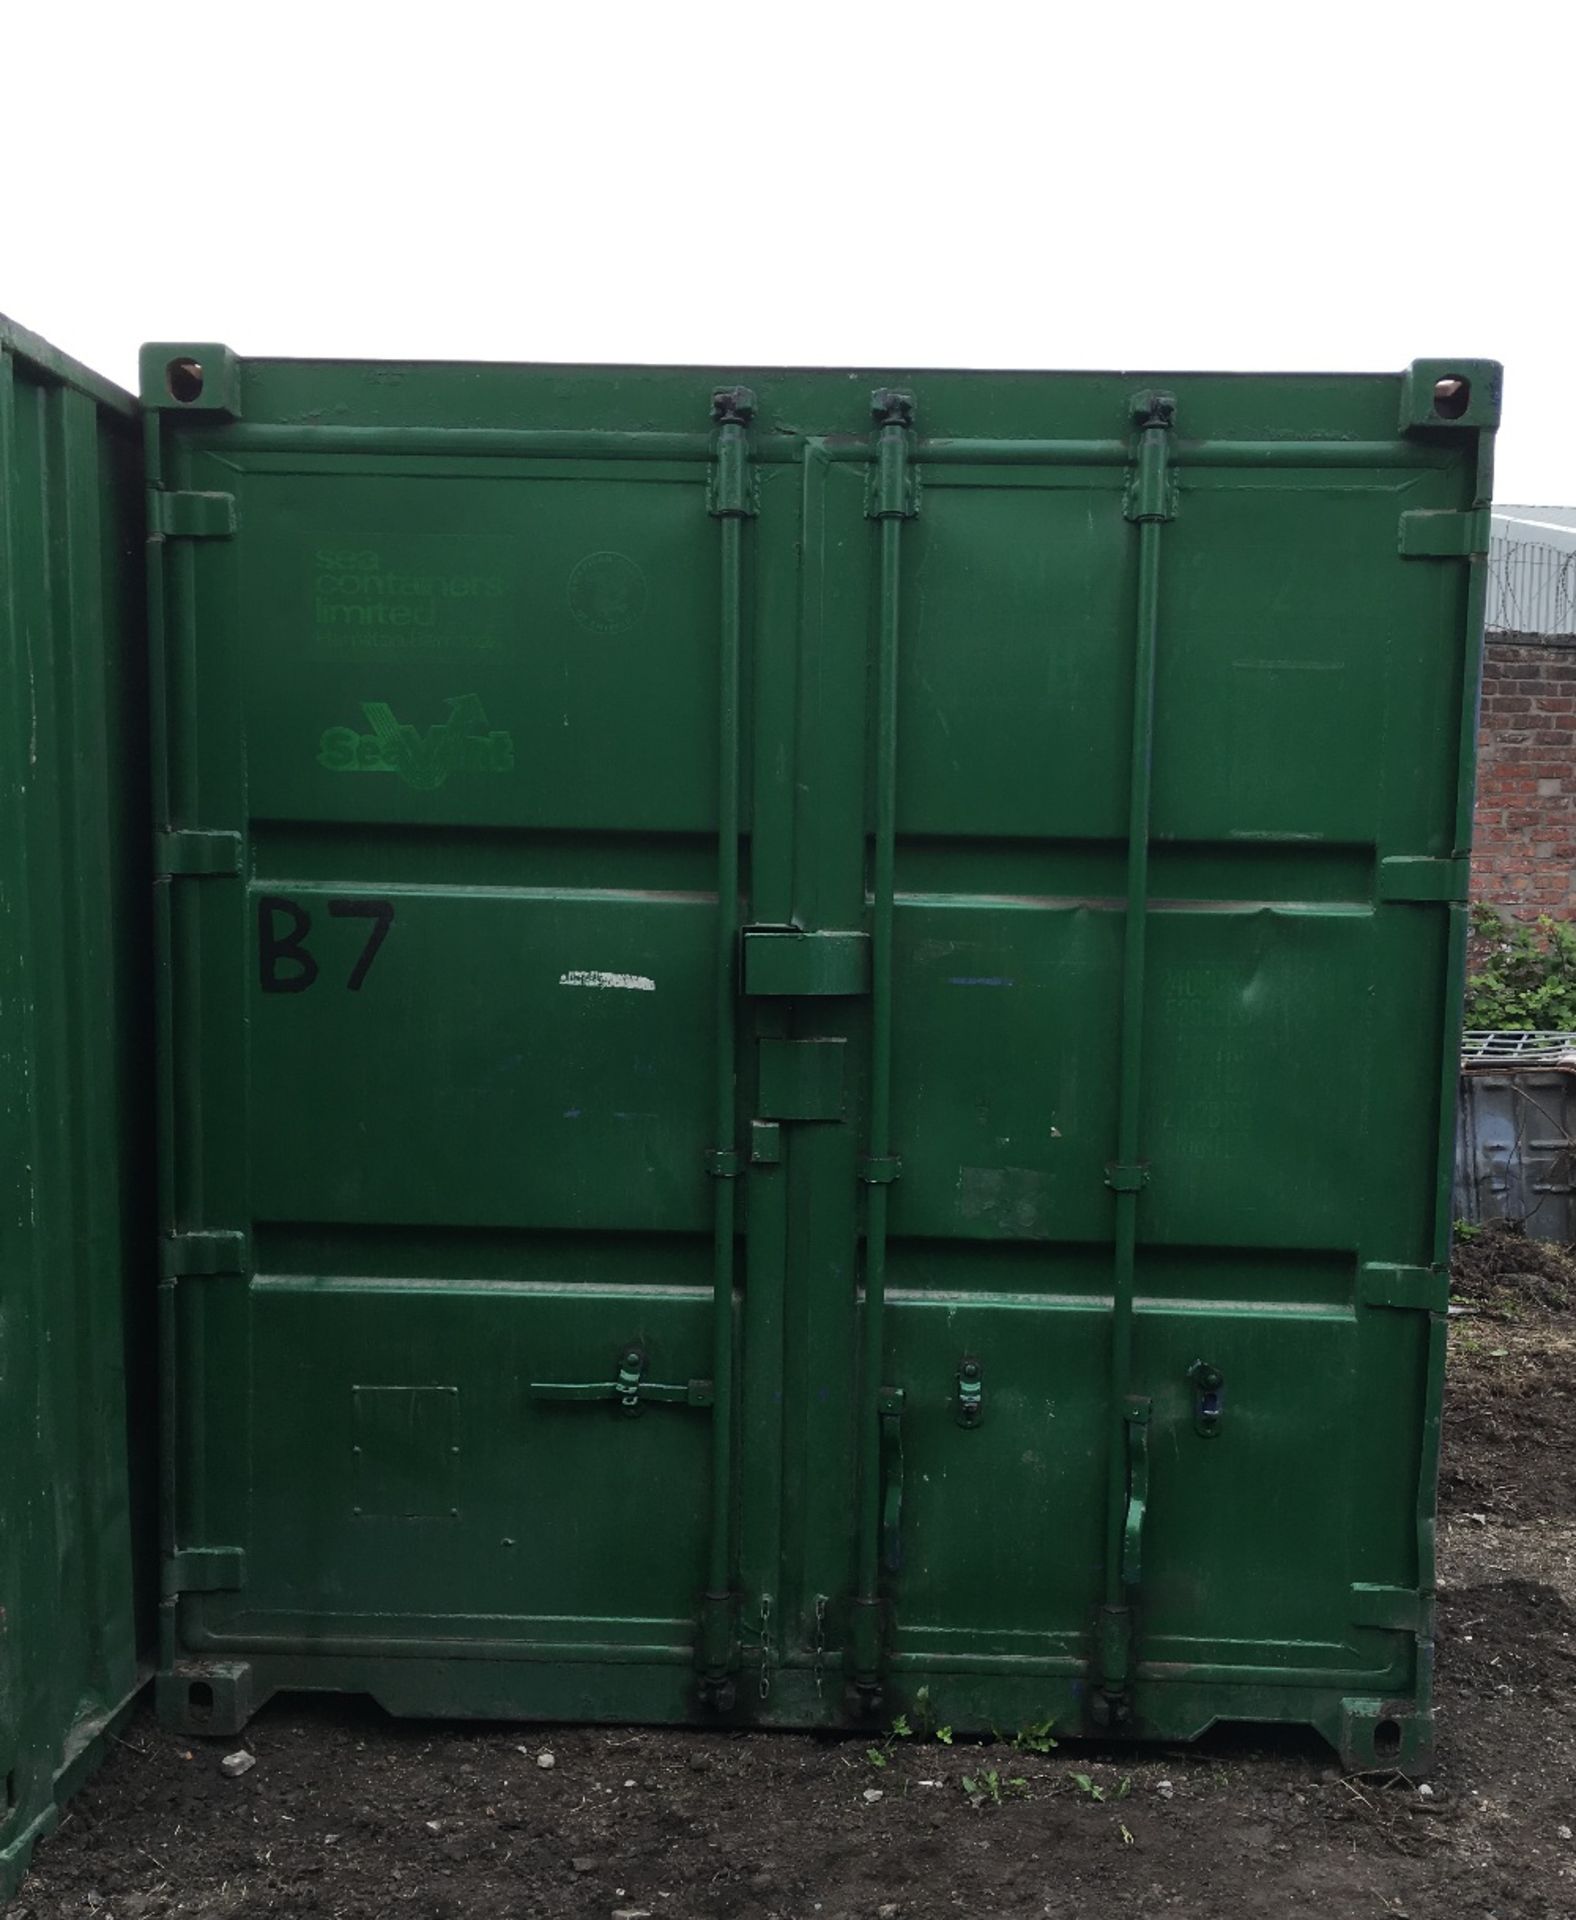 20 x 8 foot double door storage container with locking box B7 - Image 2 of 4